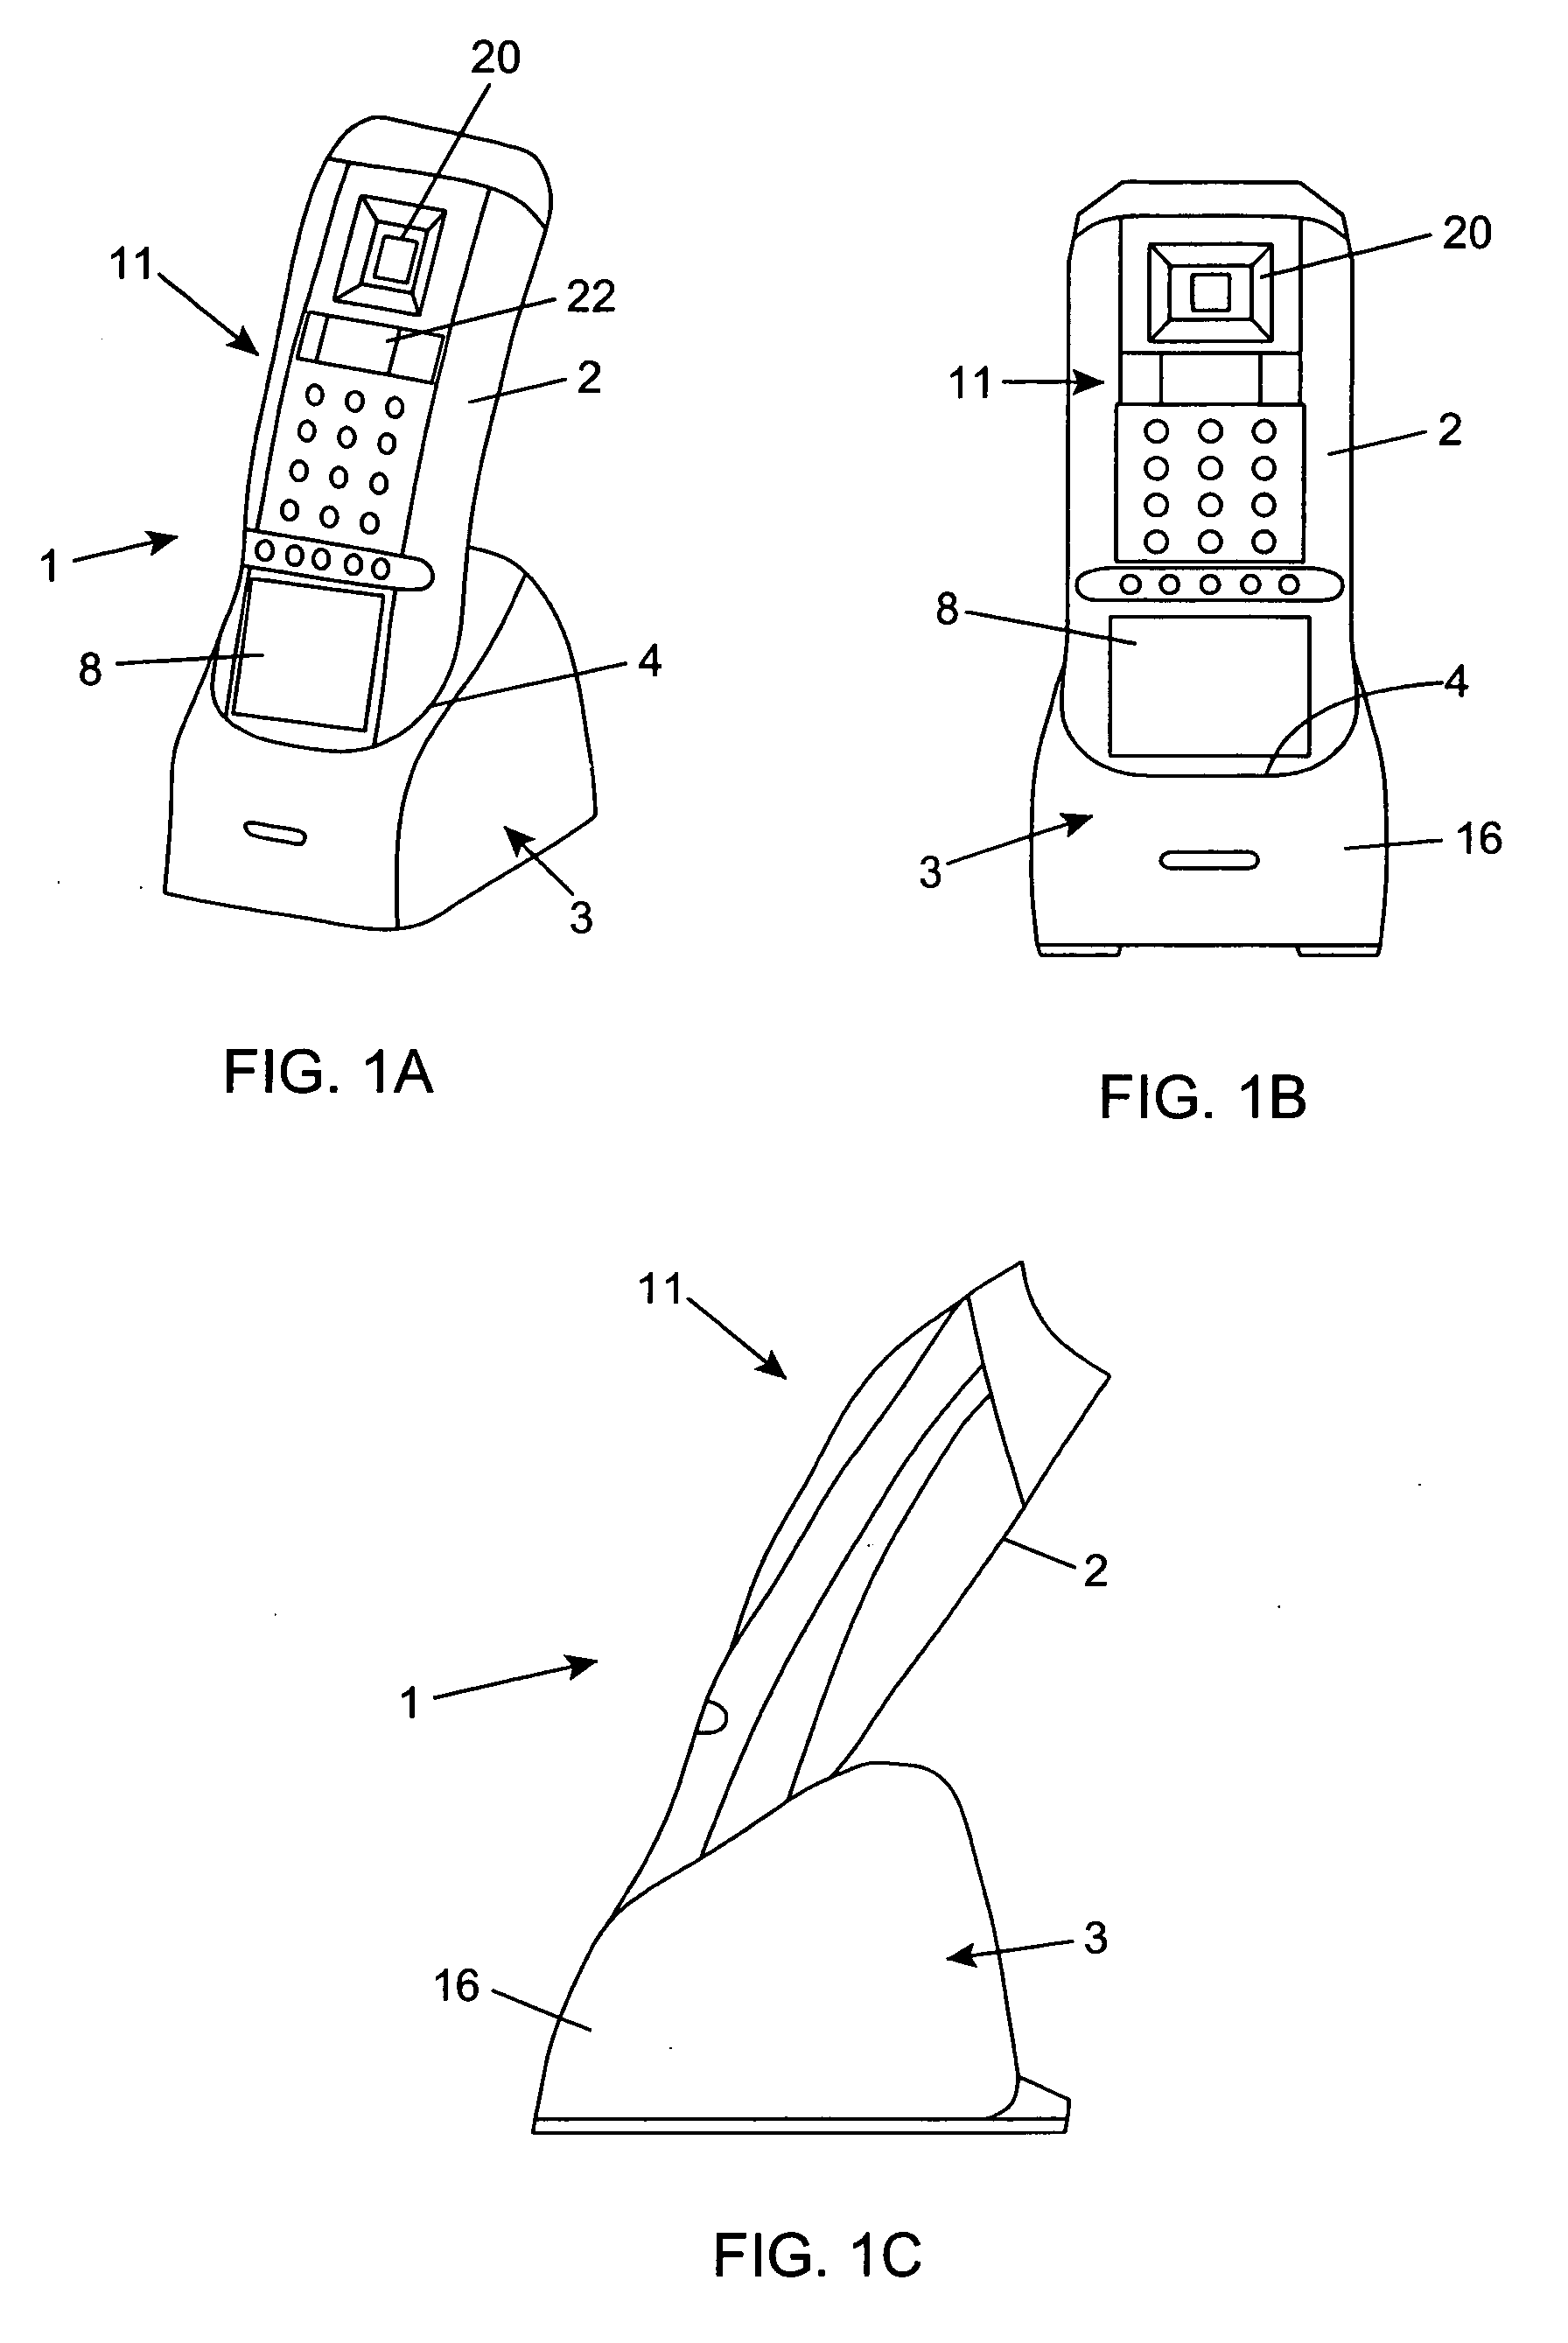 Wireless bar code symbol driven portable data terminal ( PDT) system adapted for single handed operation